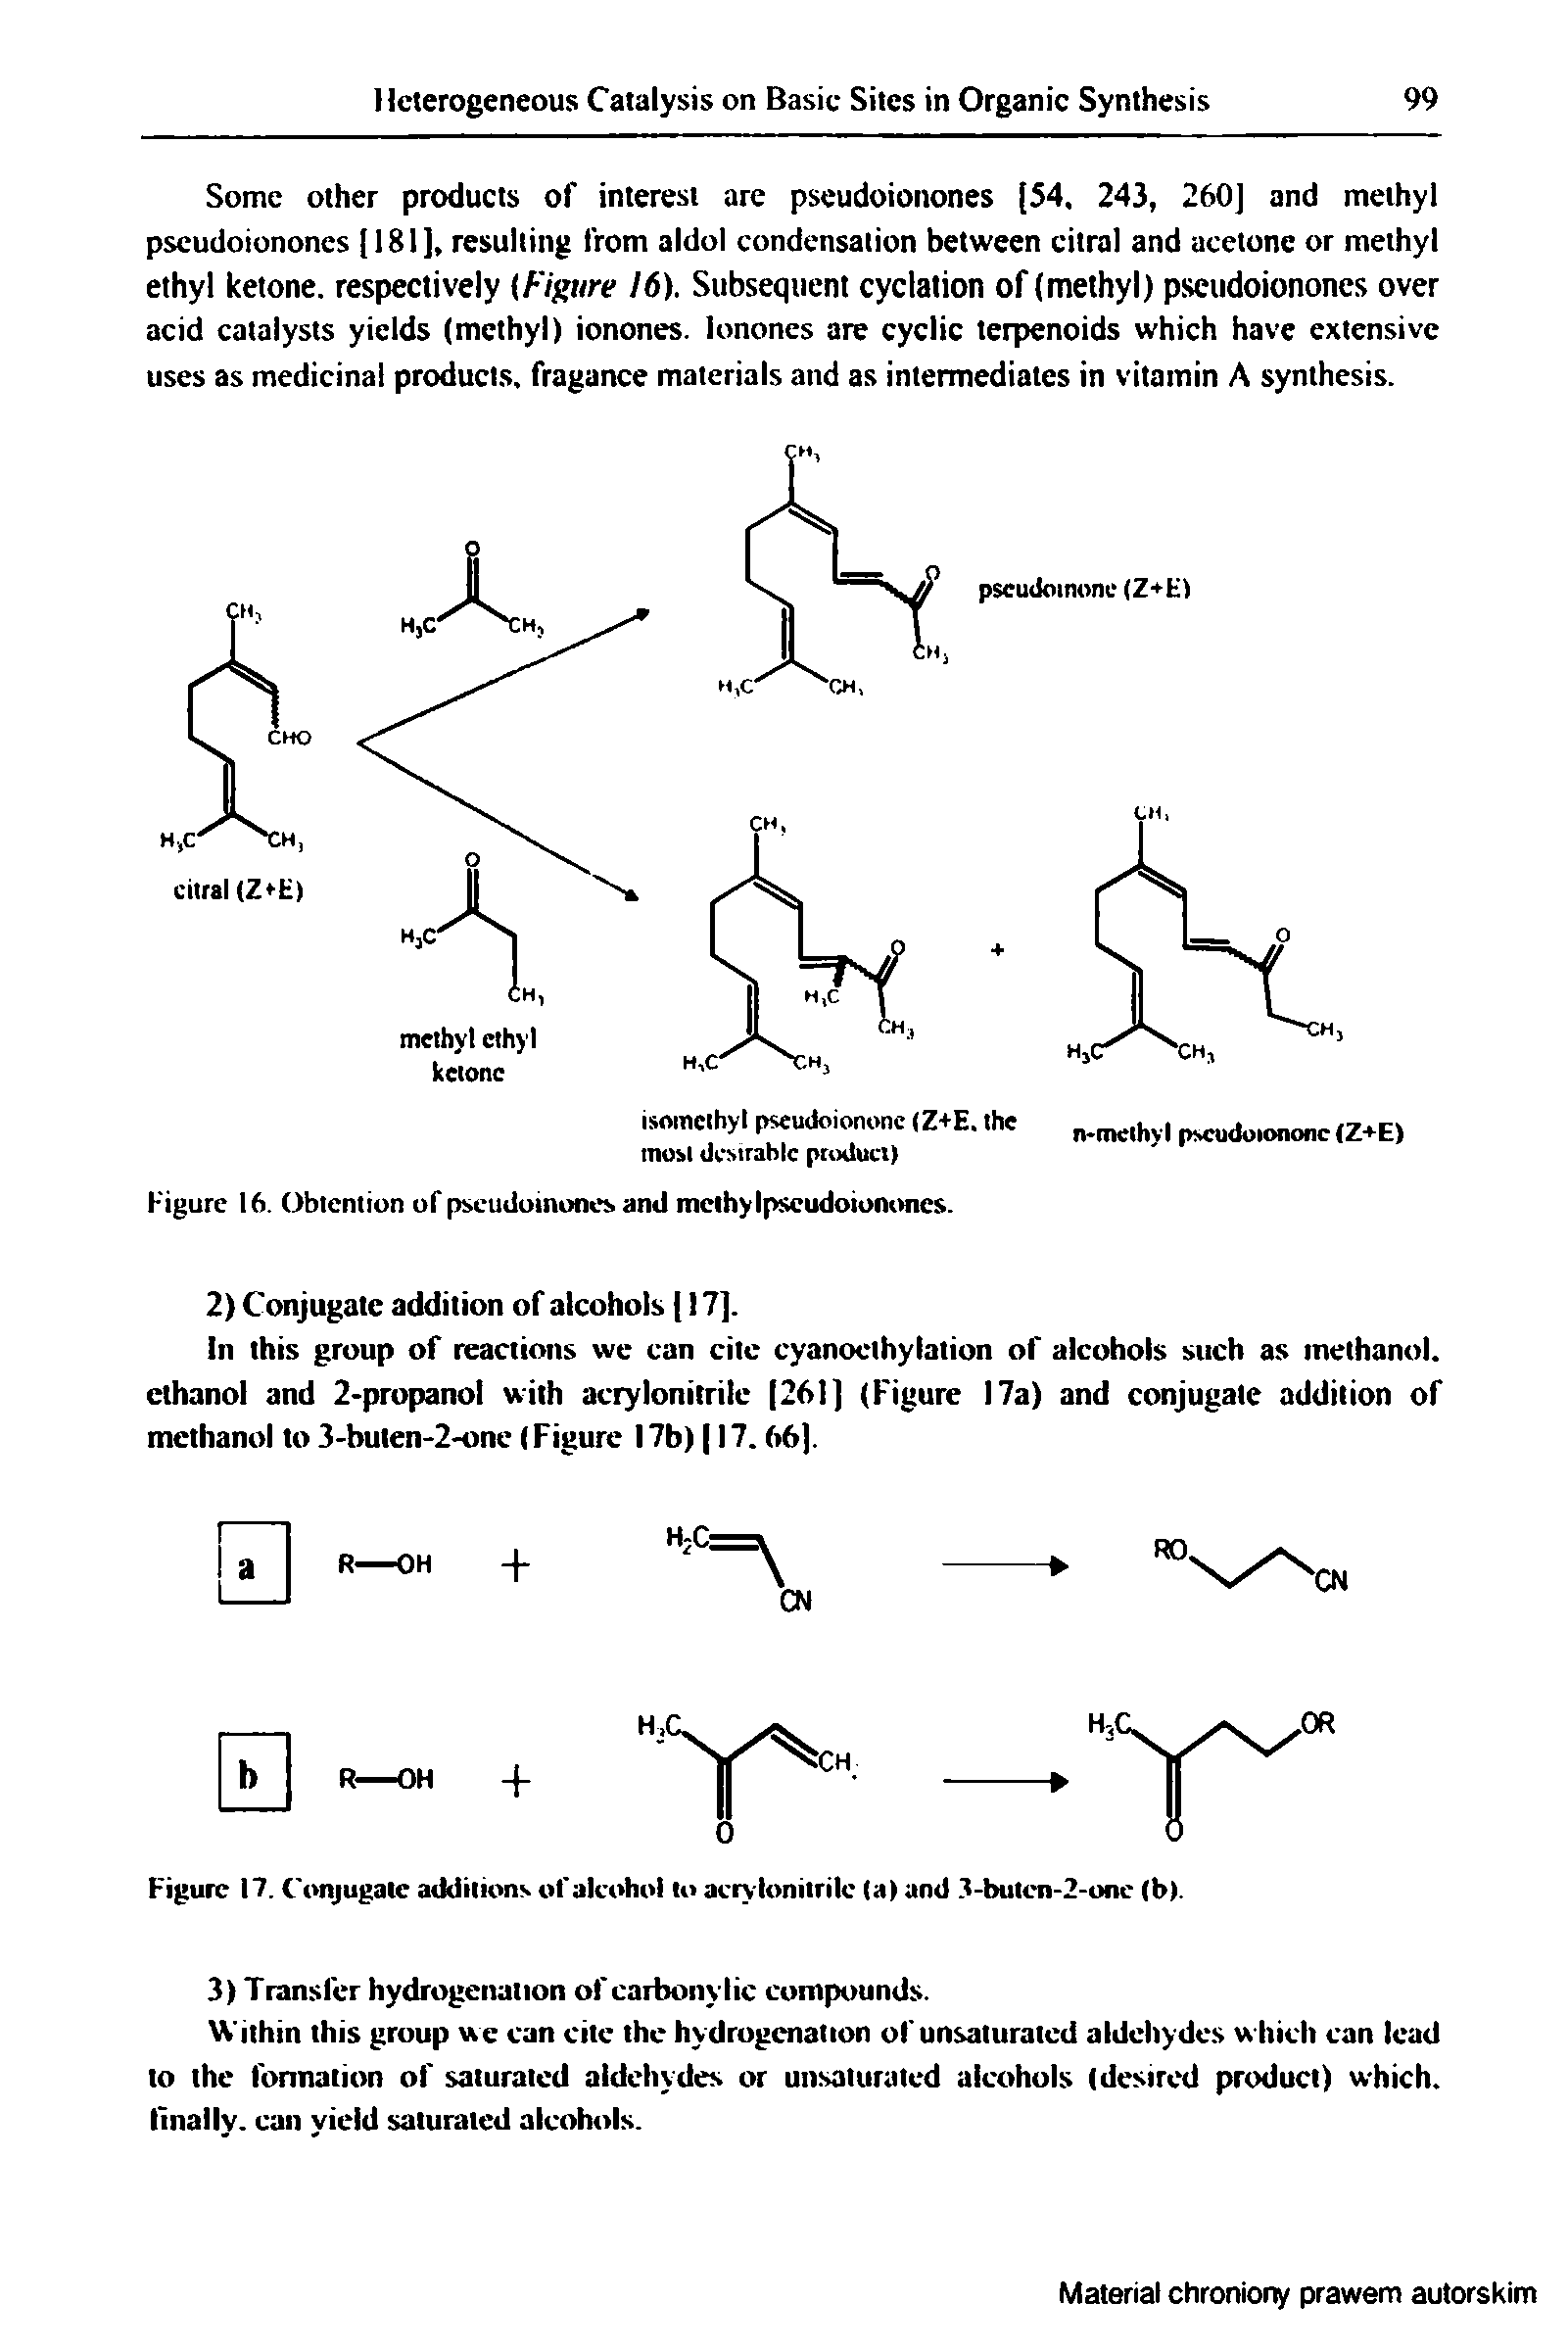 Figure 17. Conjugate additions of alcohol to acrylonitrile (a) and 3-butcn-2-unc (b).